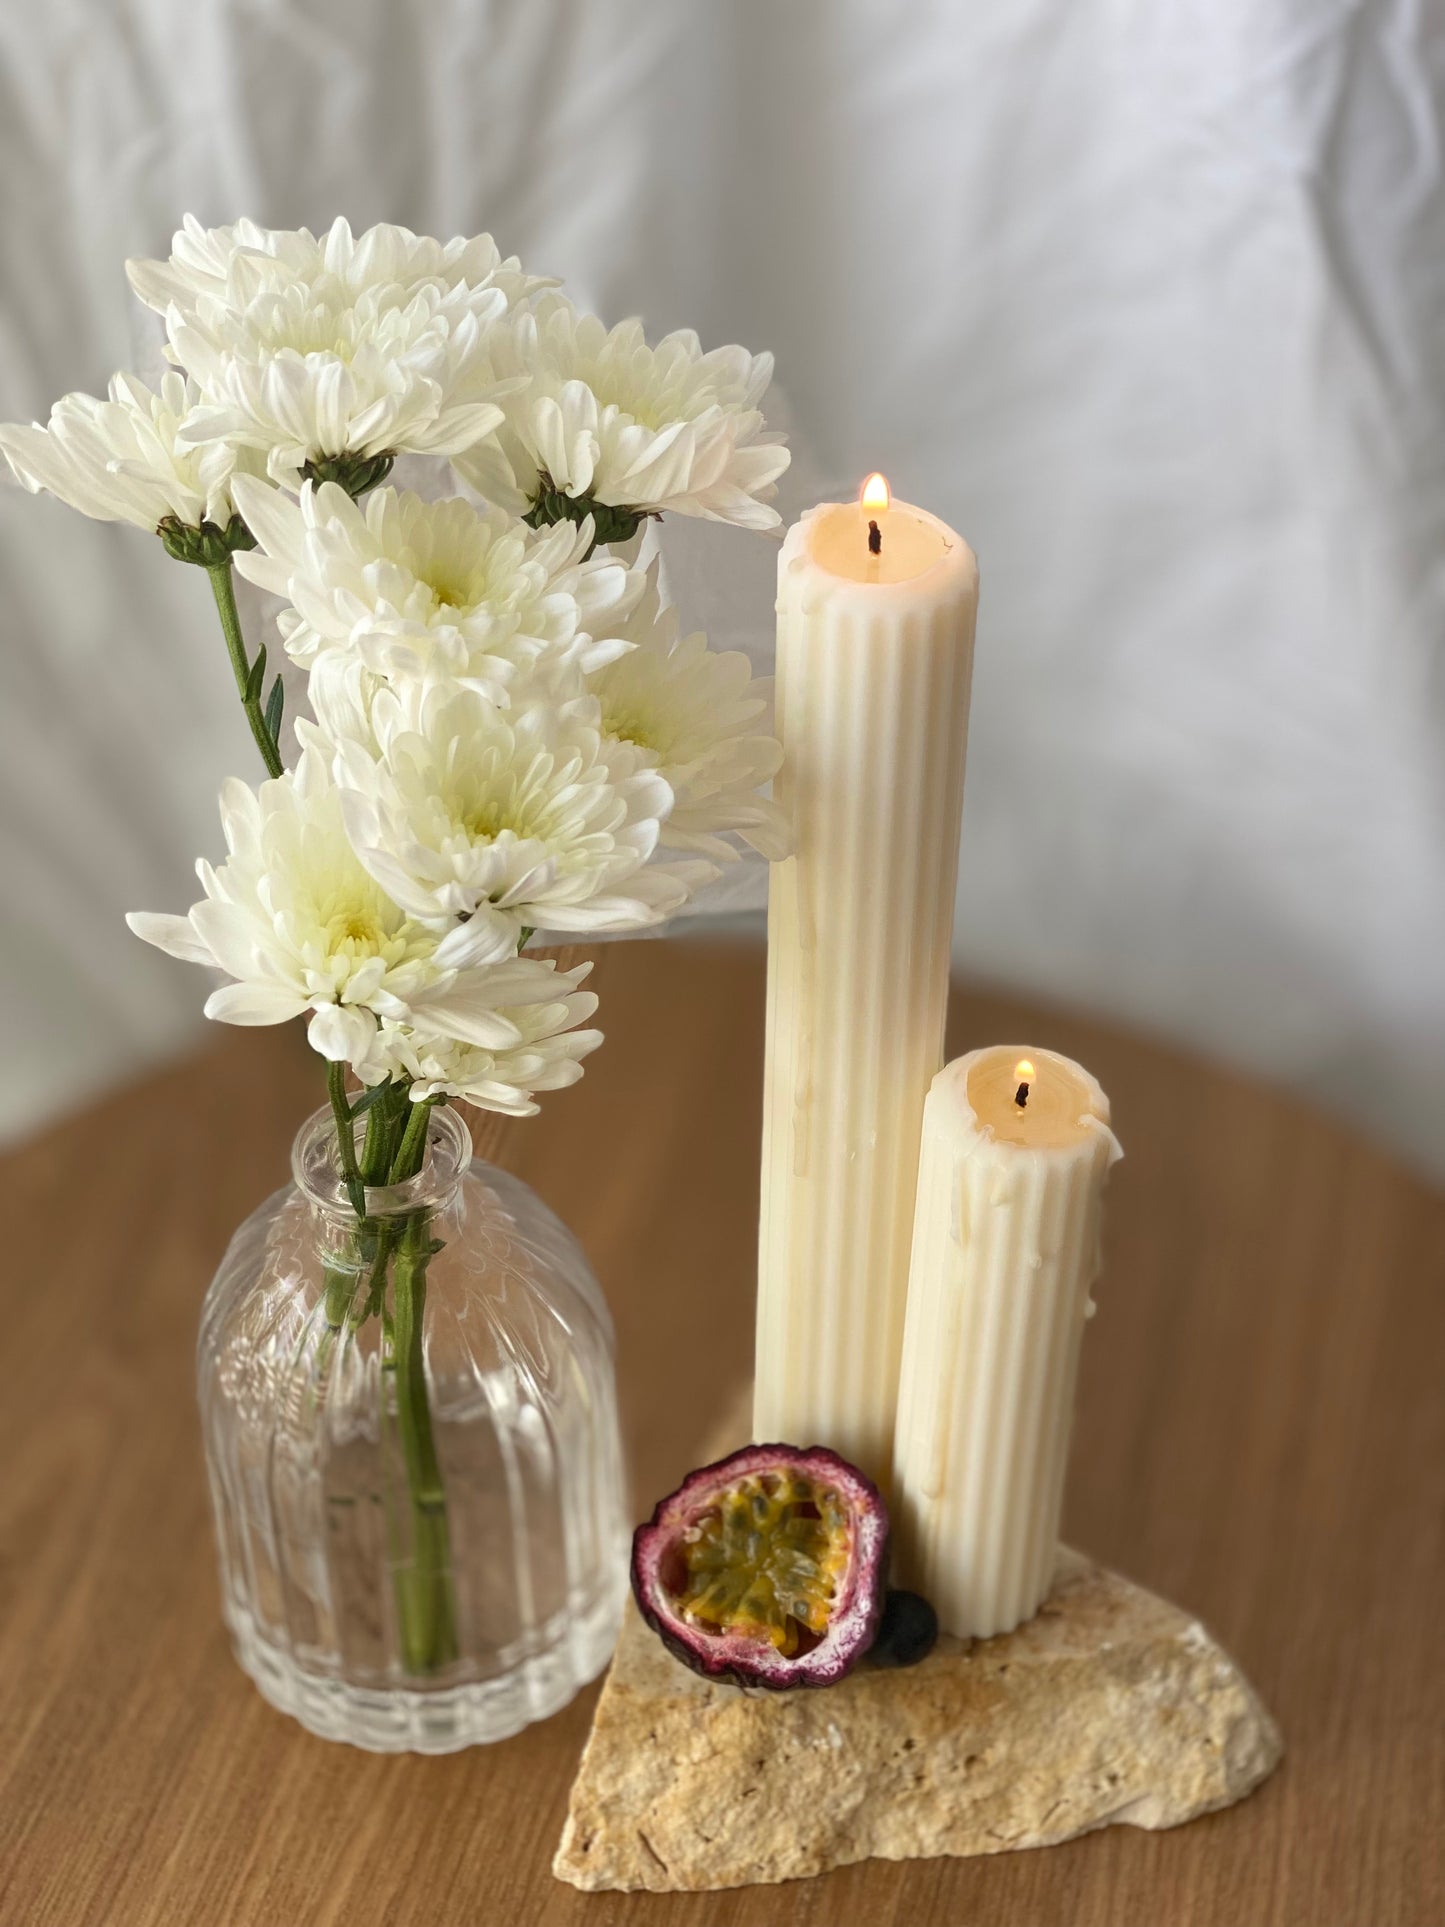 Case Pillar Candles Australia | Romantic wedding candles | Wedding reception candles | Candle wedding centerpieces on a budget | Free Standing Candles | Paraffin Free Candles | Unscented Candles | Column Candles | Free Standing Candles Australia | Candles